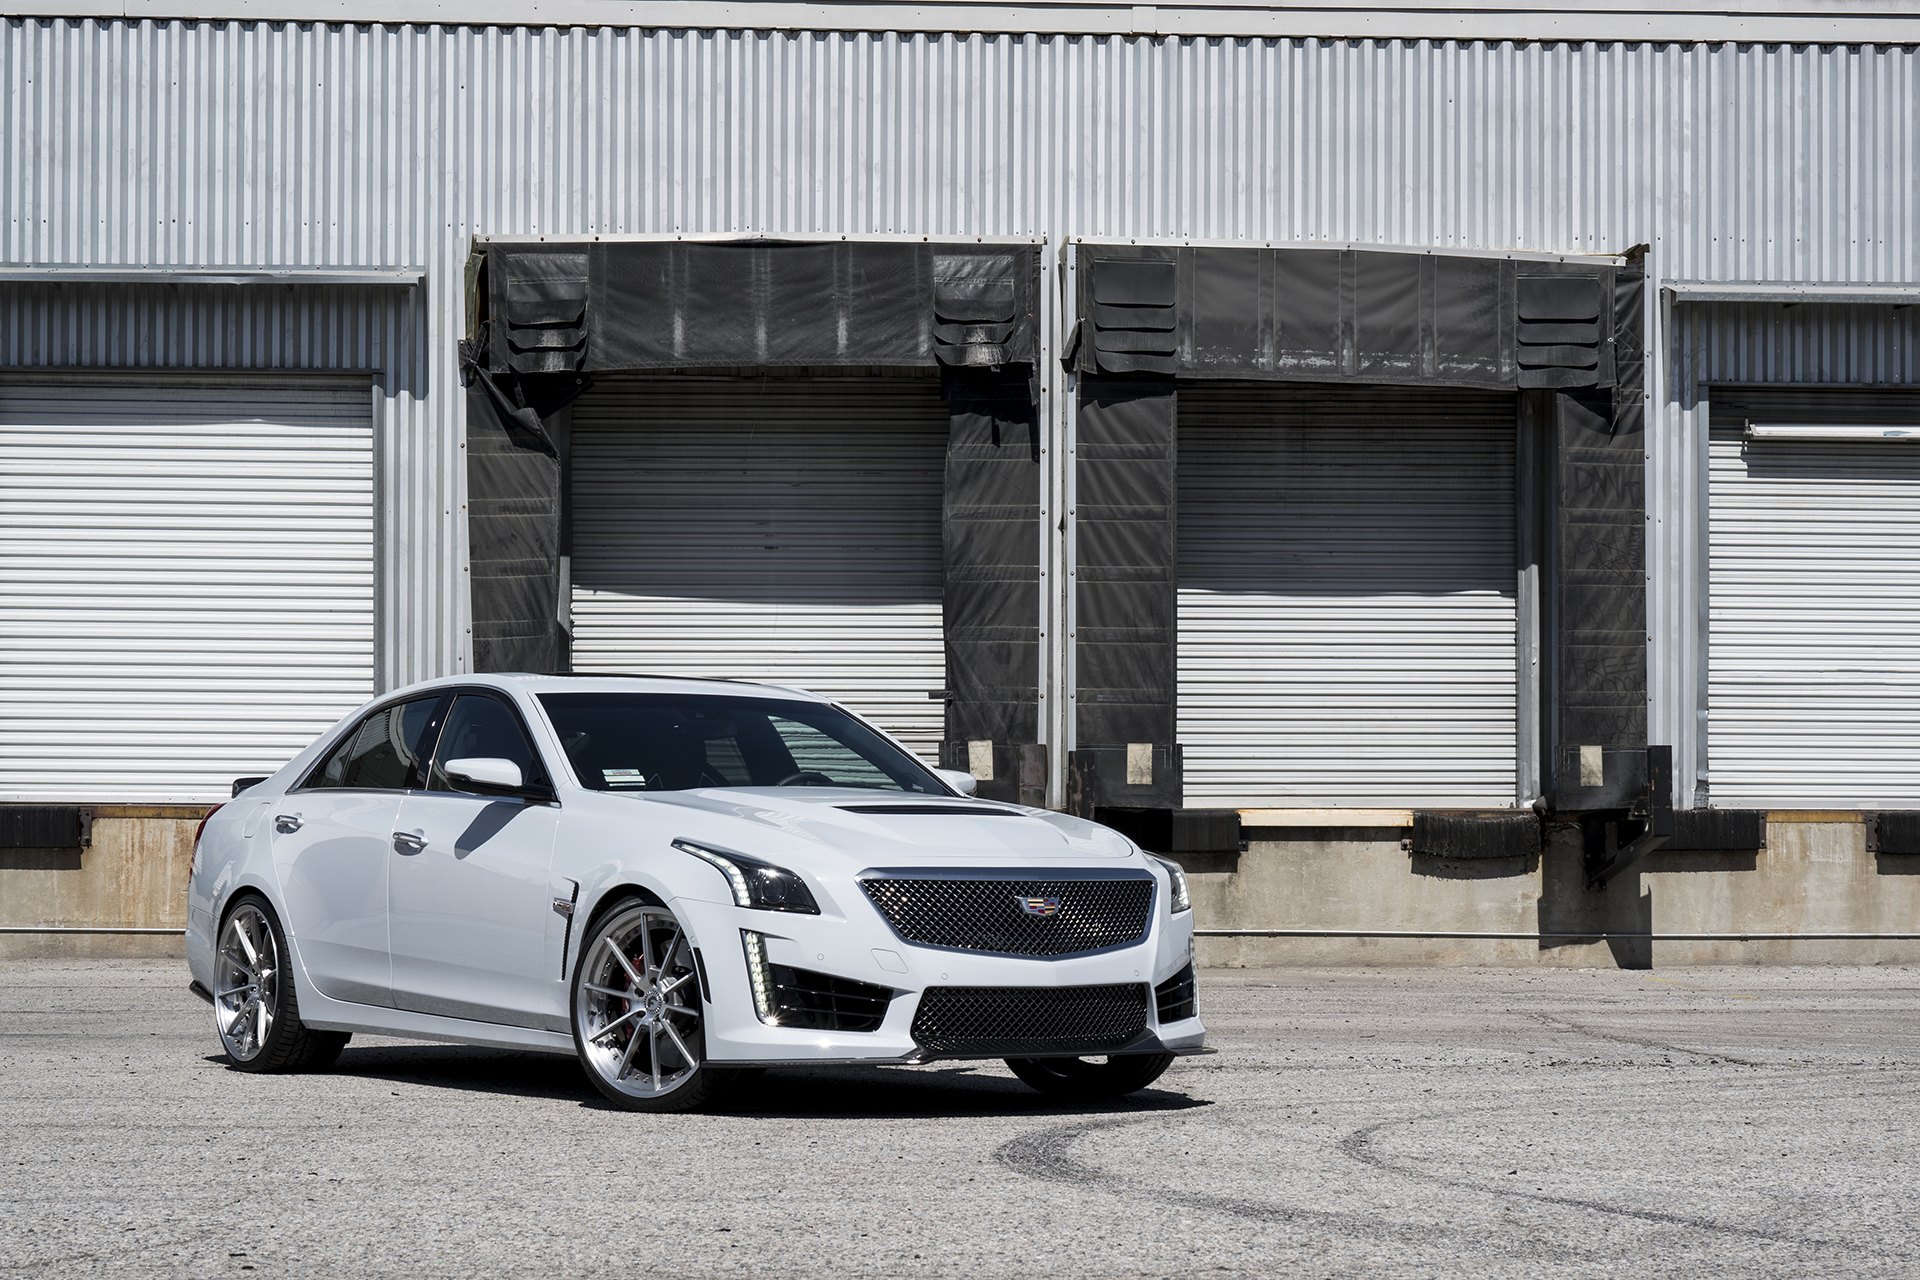 Gray Cadillac CTS with Blacked Out Mesh Grille - Photo by Forgiato